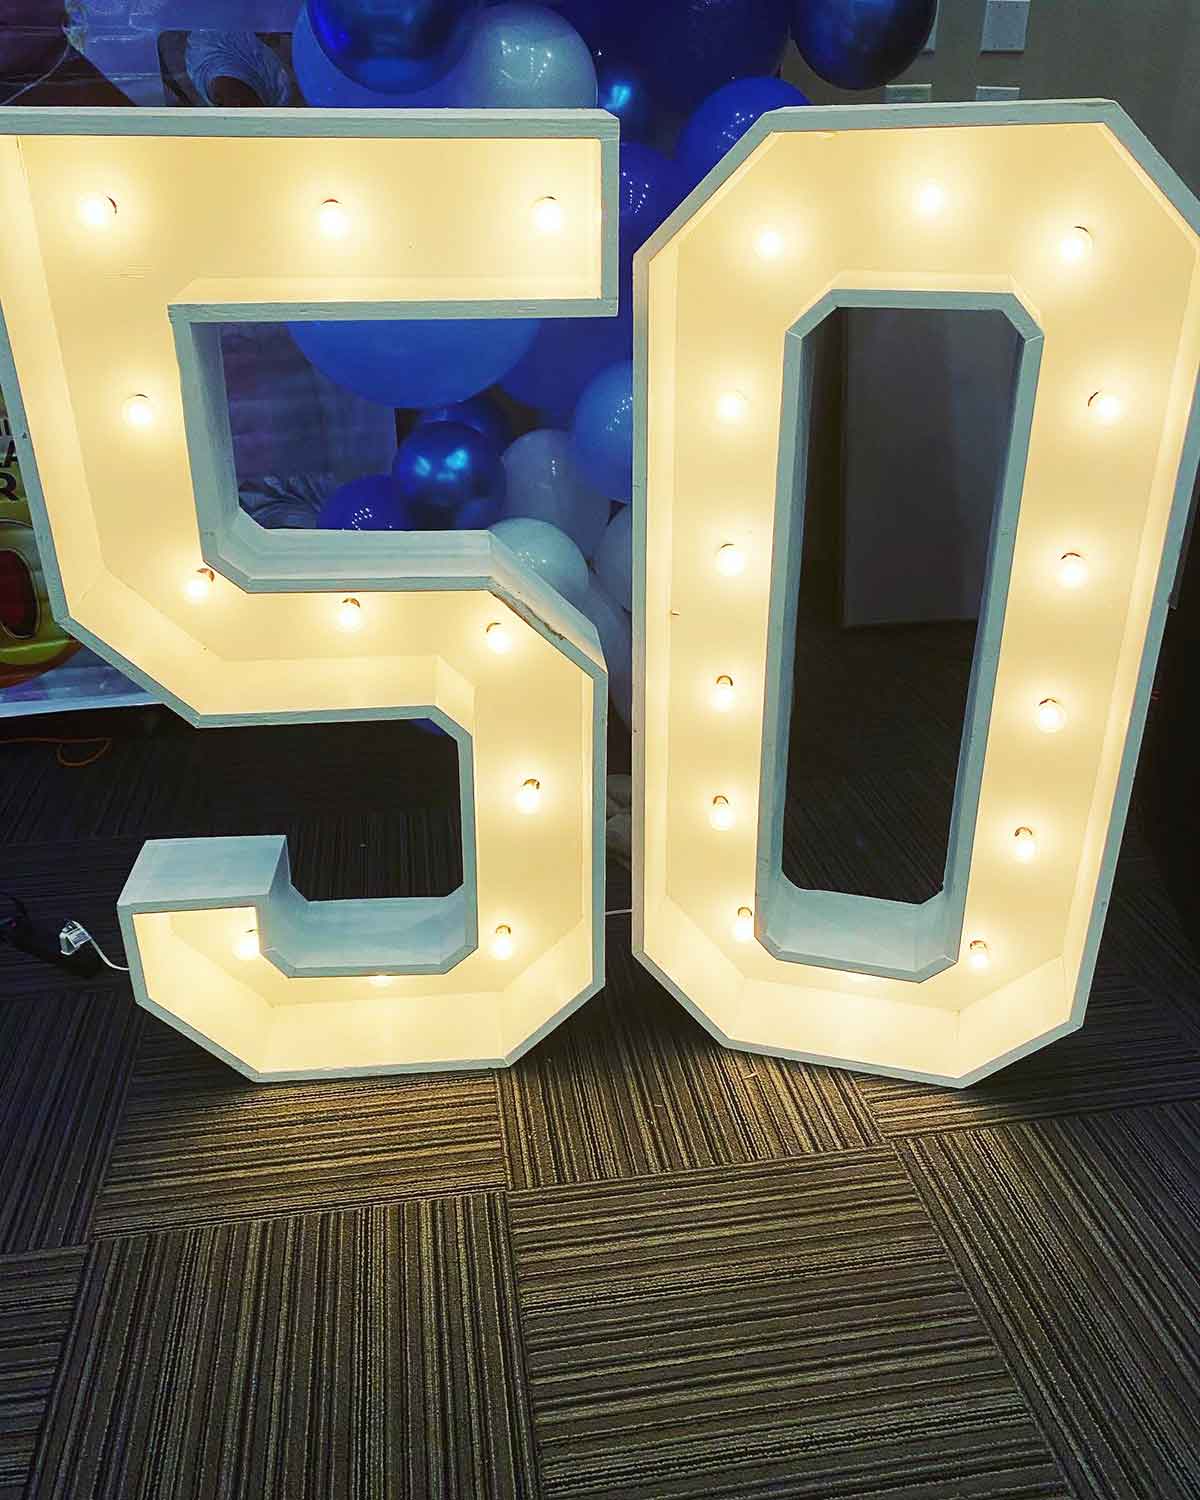 Marquee Numbers